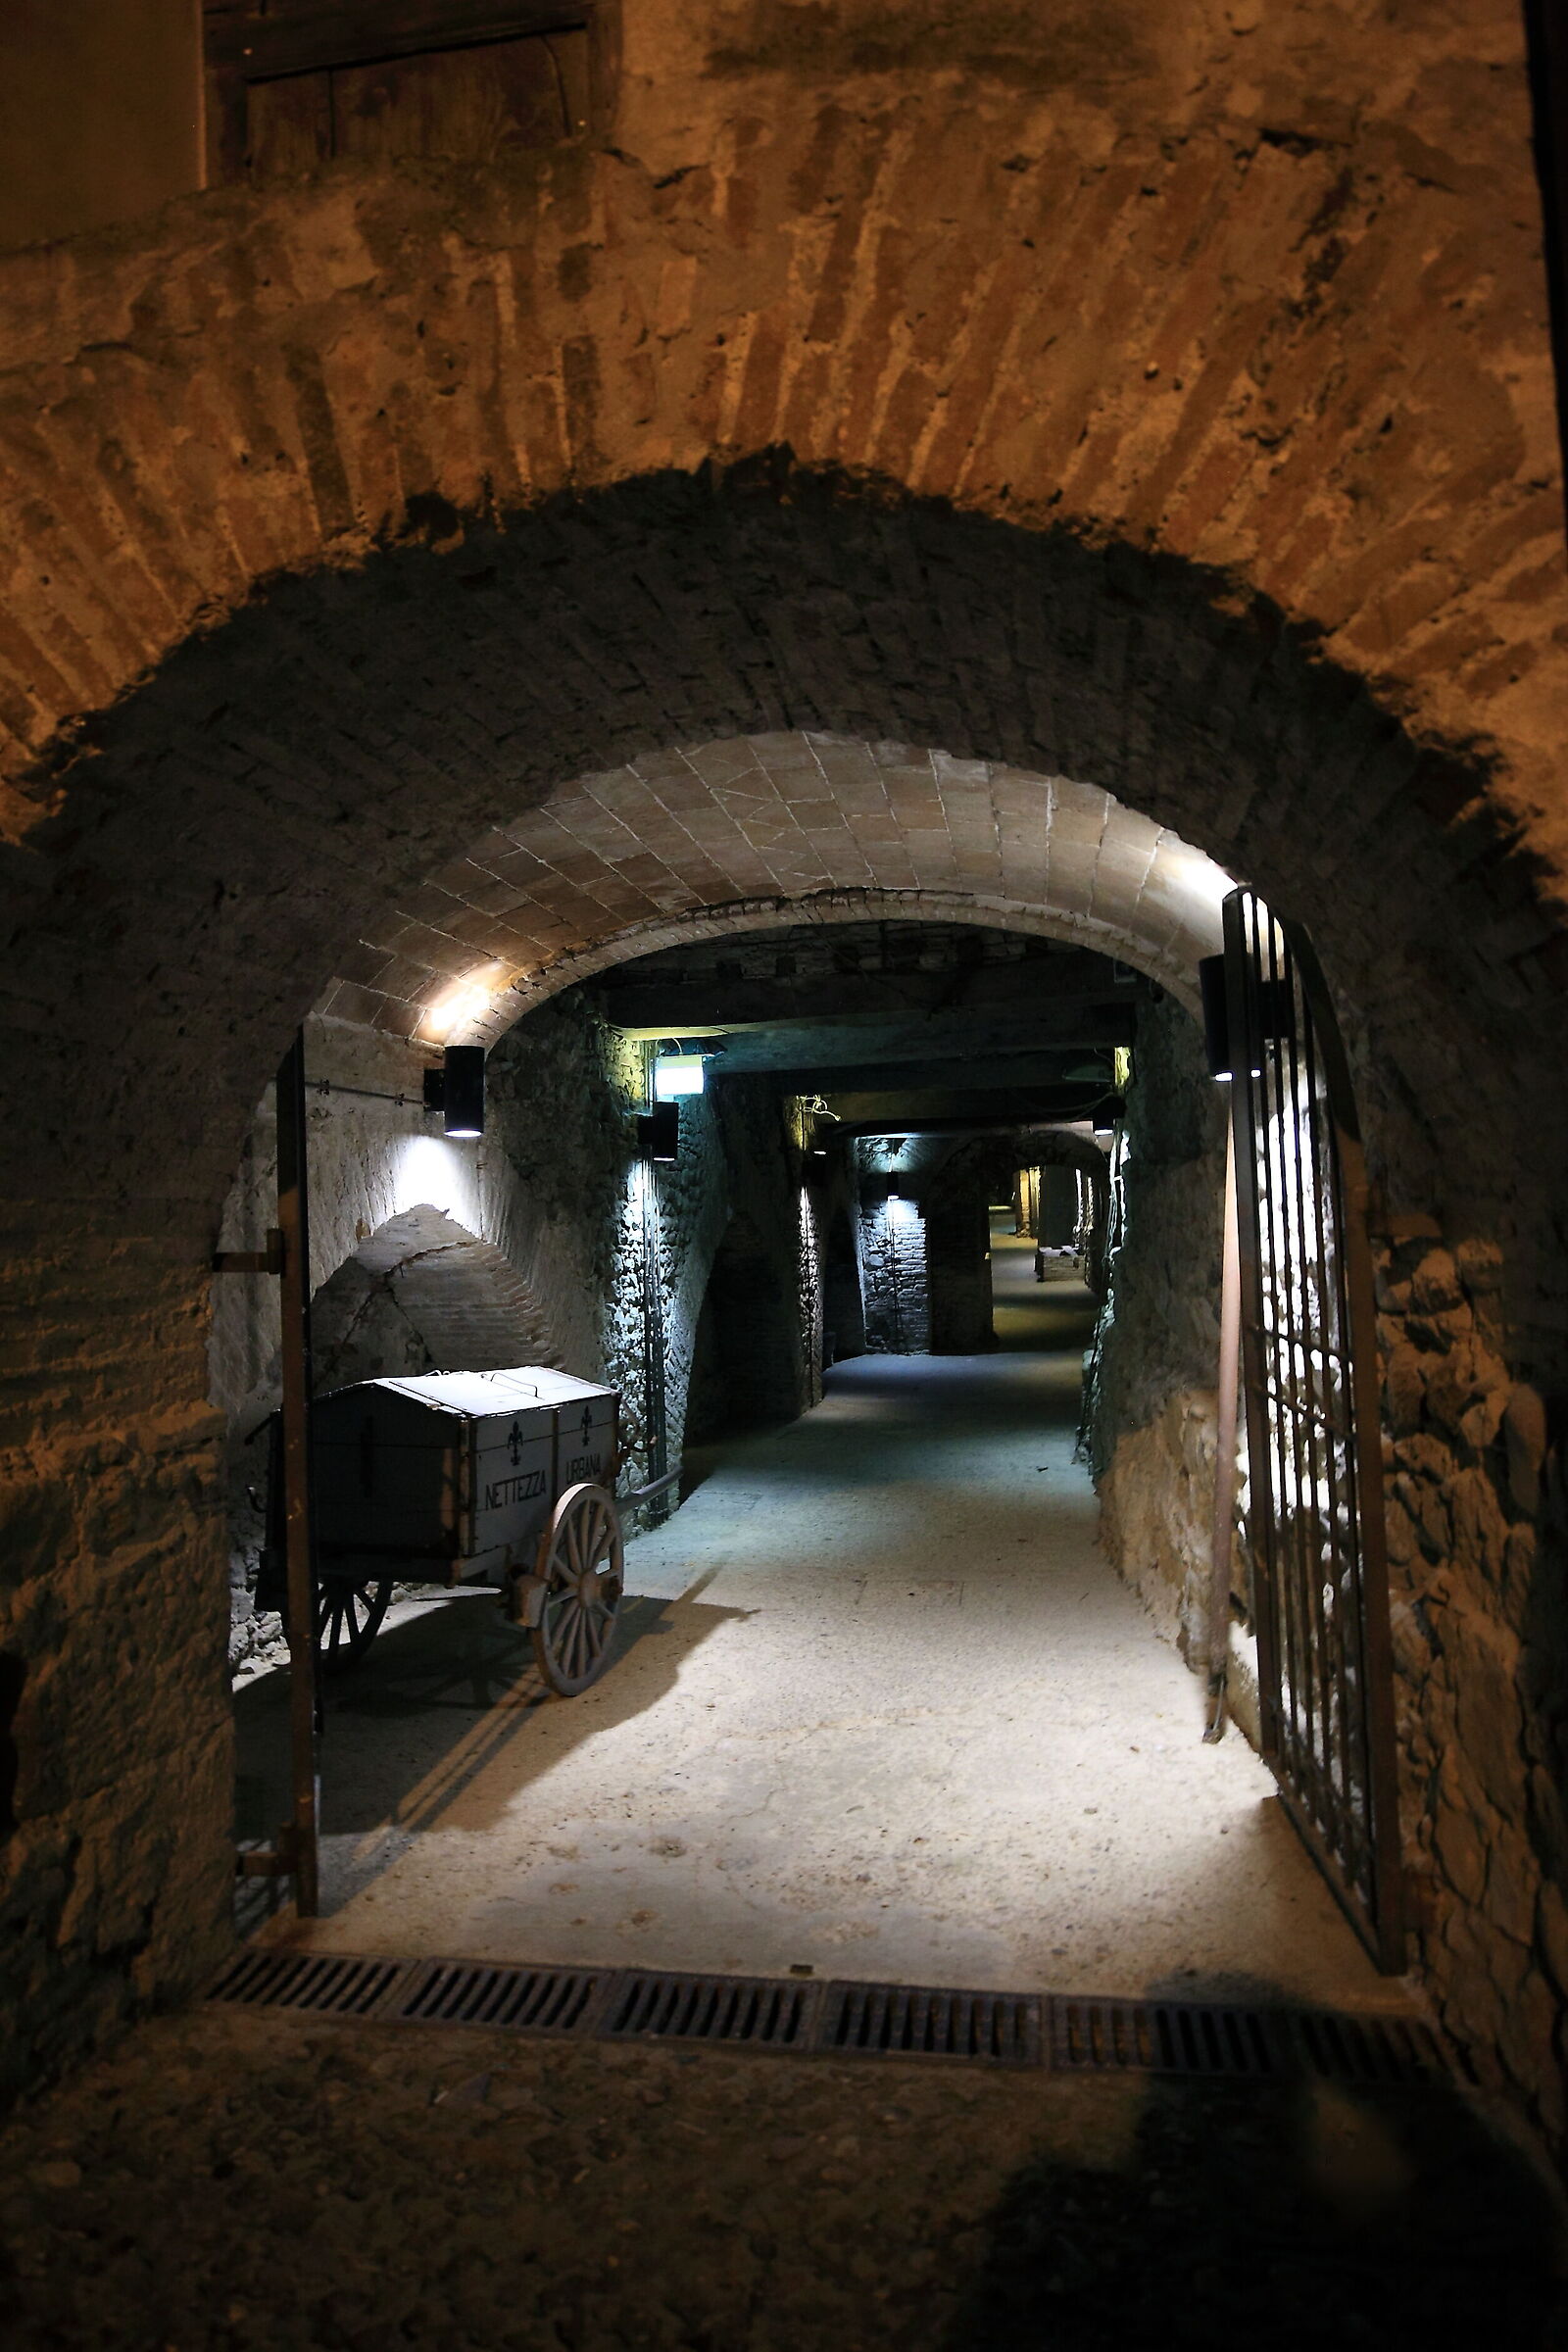 The interior of the Vicar's bastion...